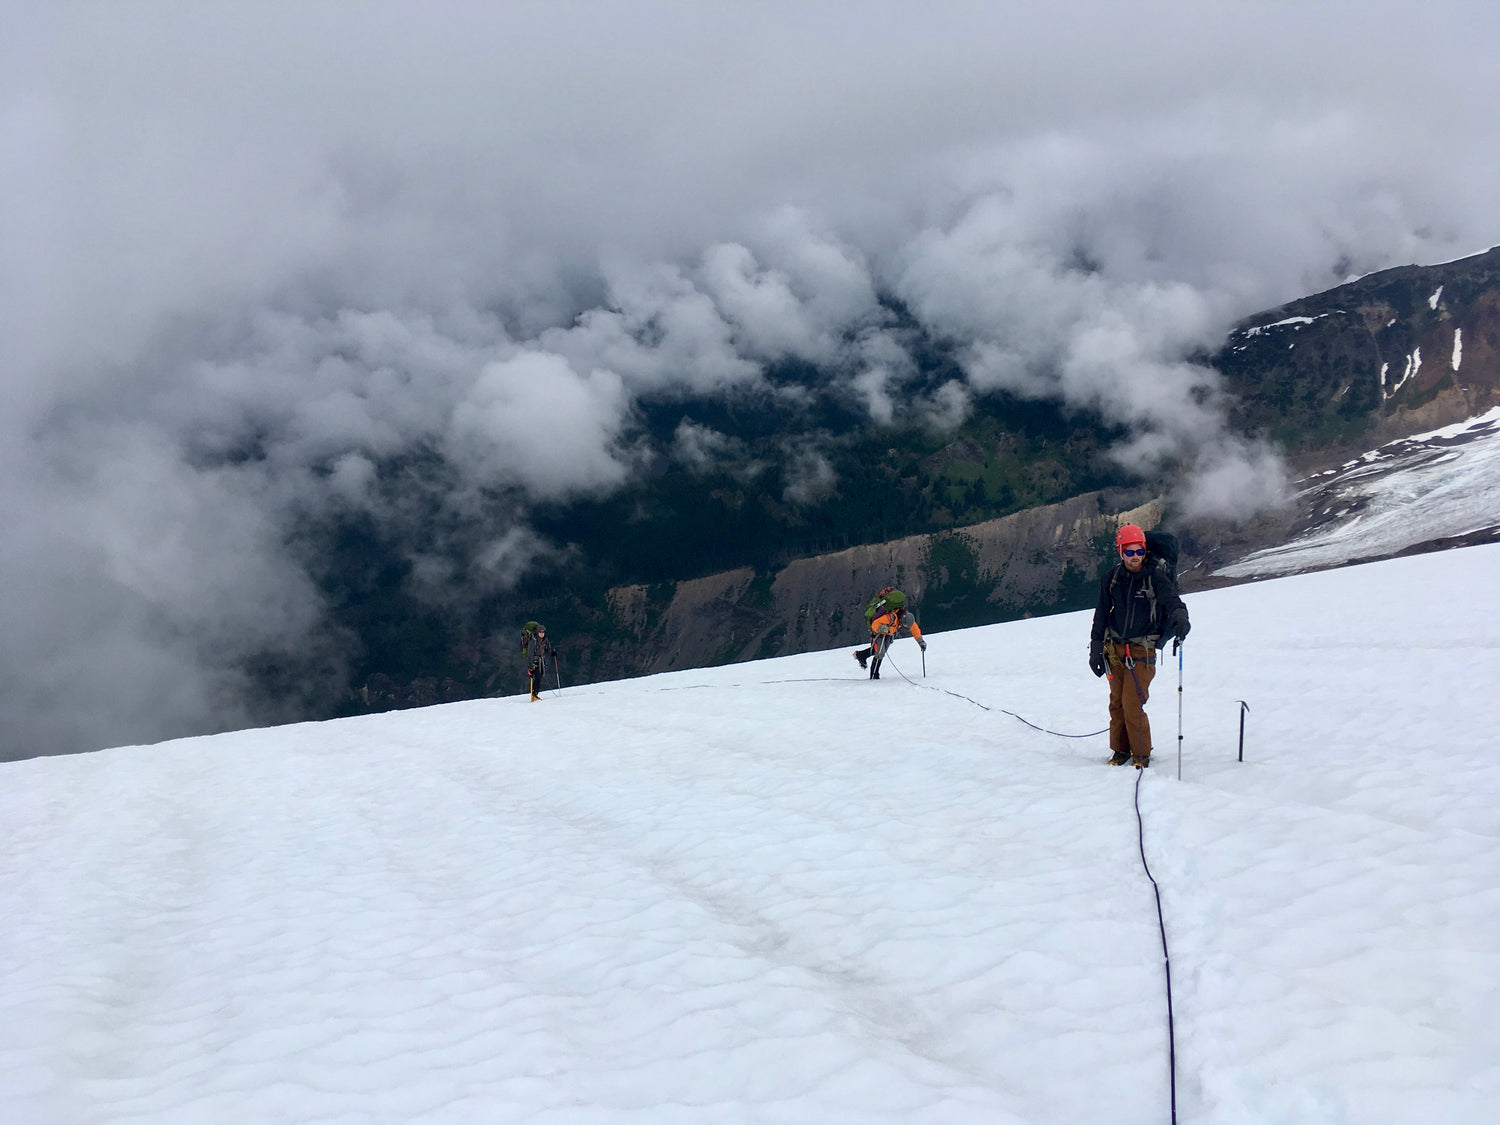 Our guides lead a rope team above the clouds on the Coleman Glacier.